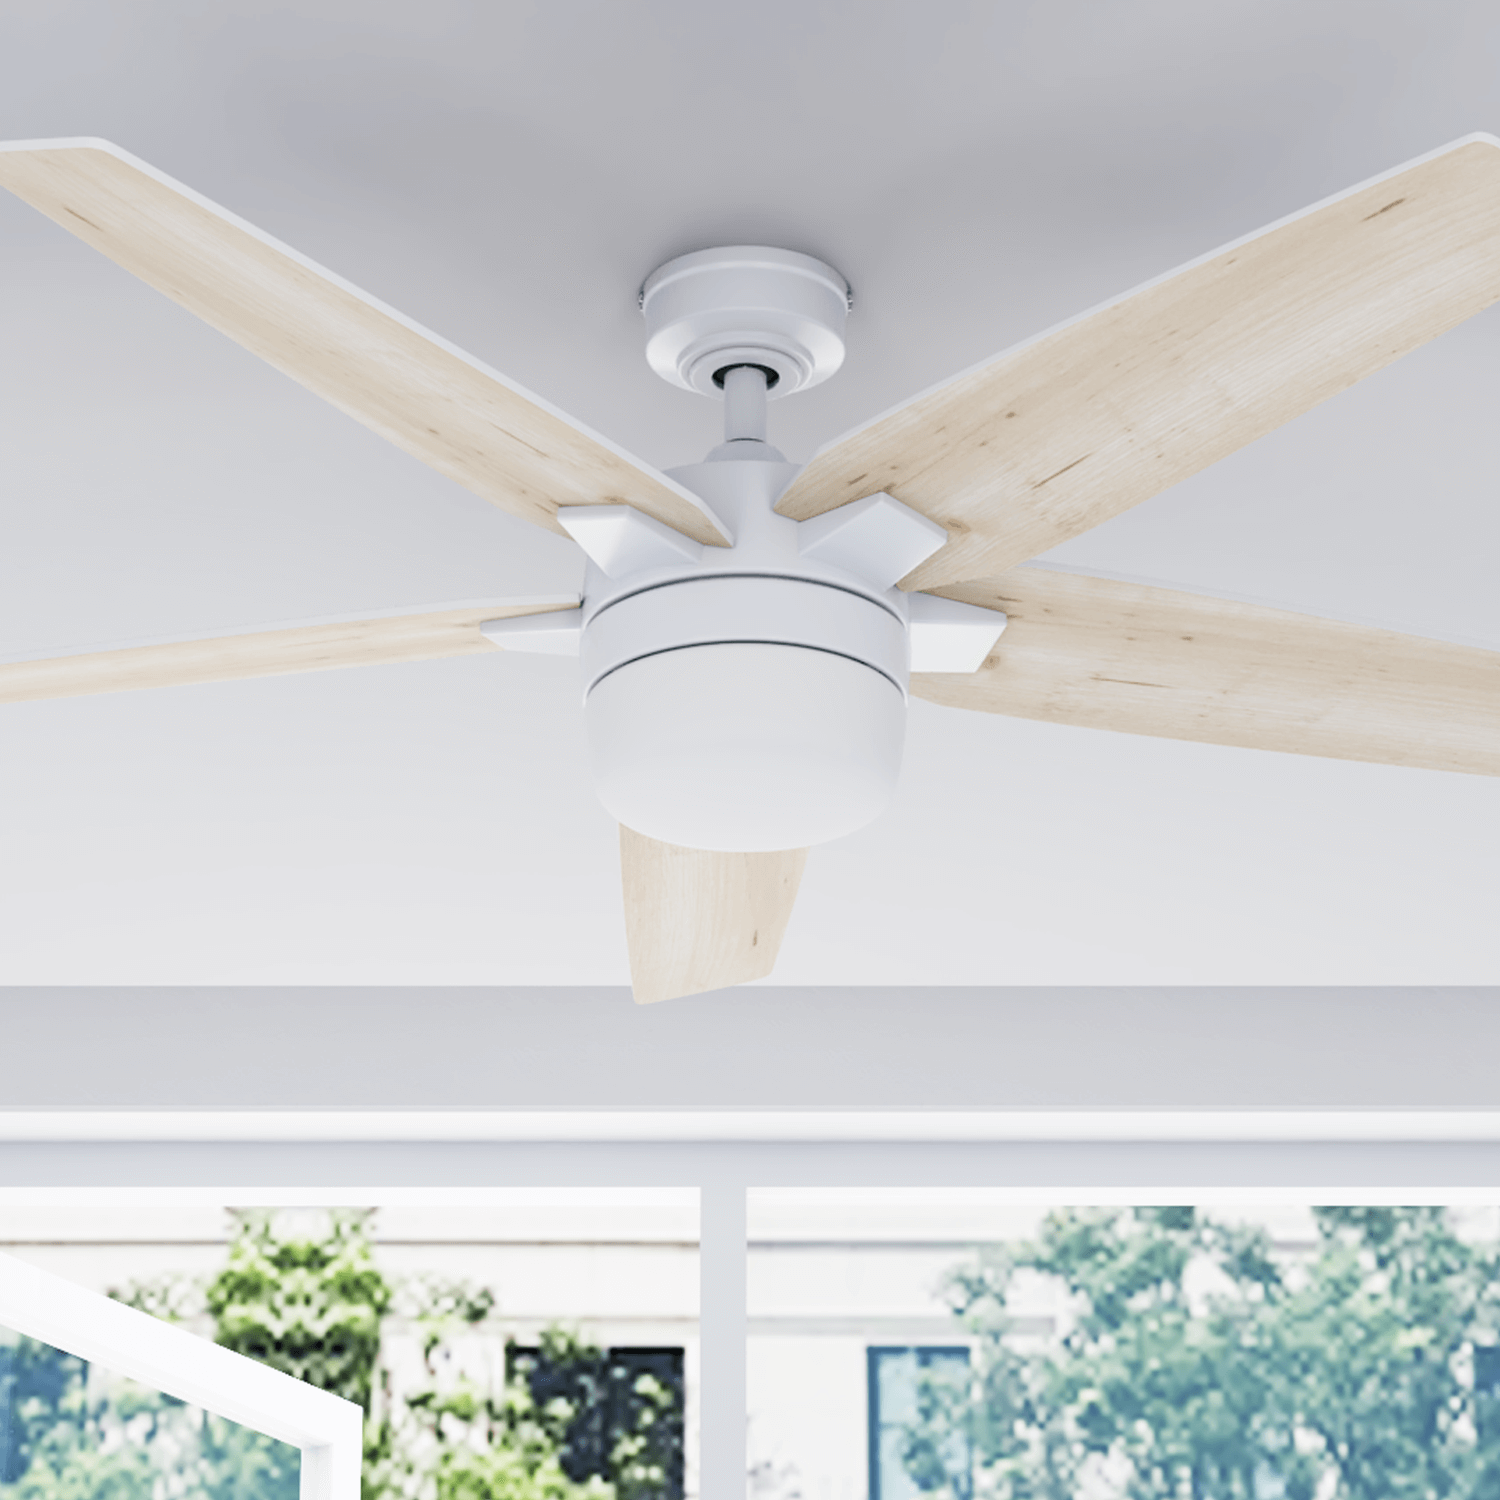 52 Inch Dorsey, Bright White, Remote Control, Smart Ceiling Fan by Prominence Home